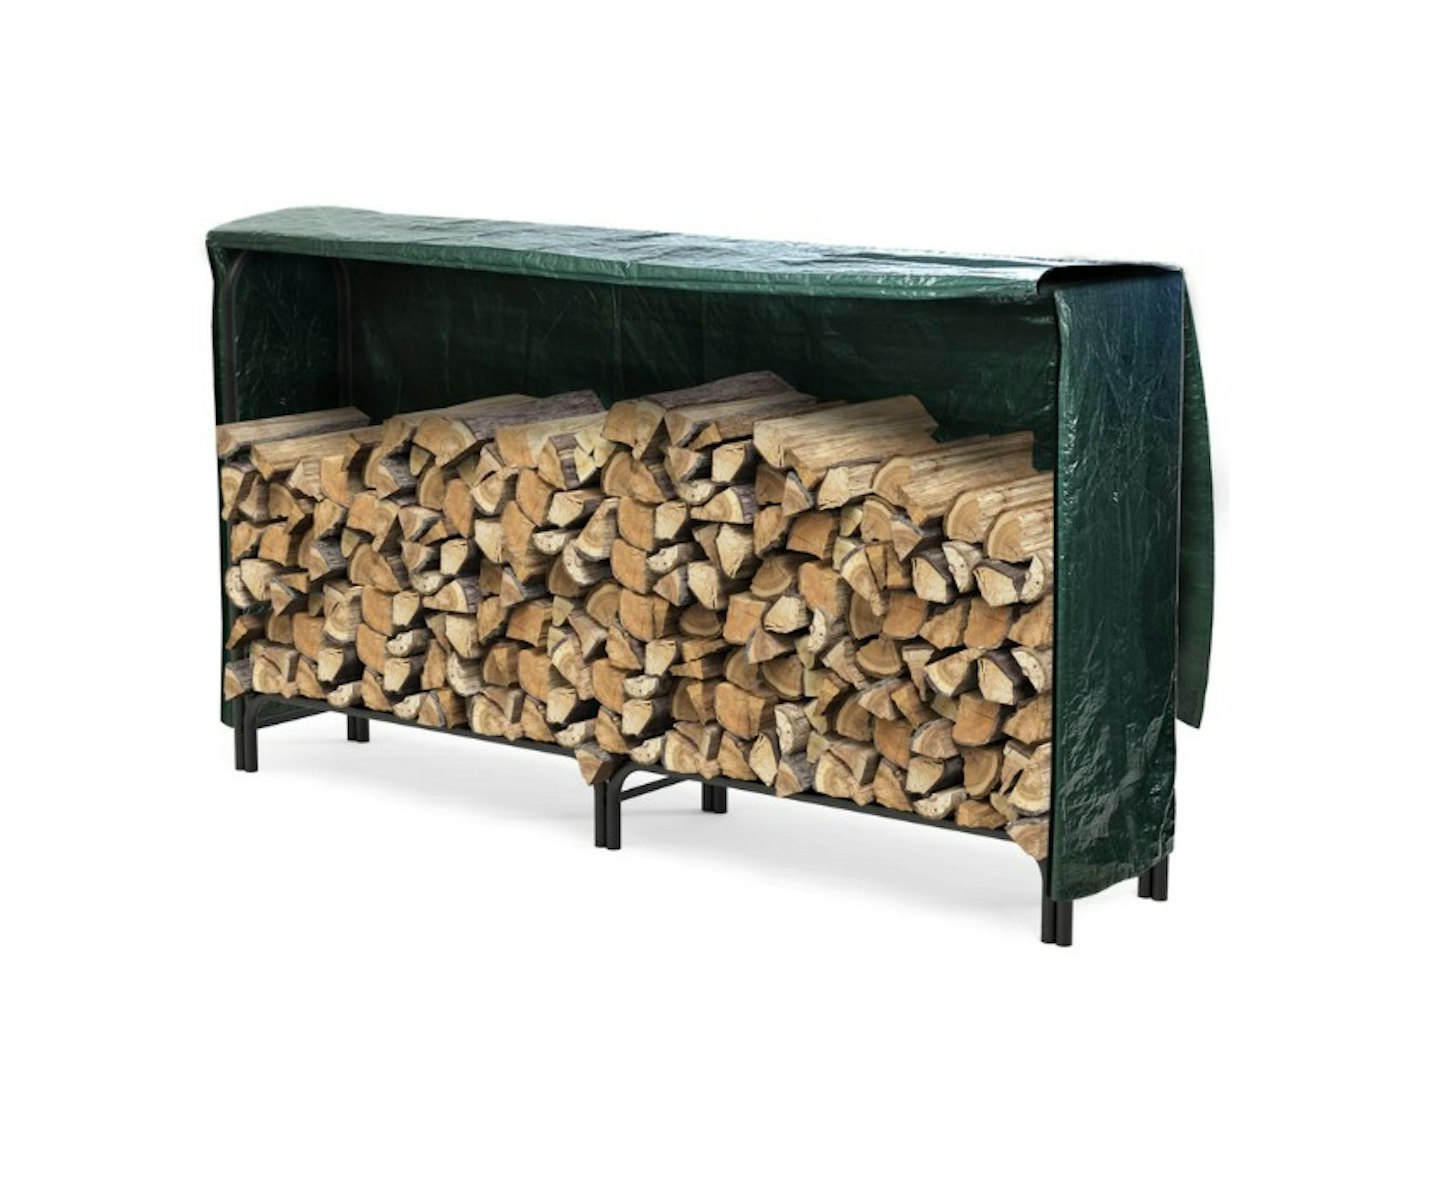 VOUNOT Firewood Log Rack with Cover, Metal Log Store Outdoor